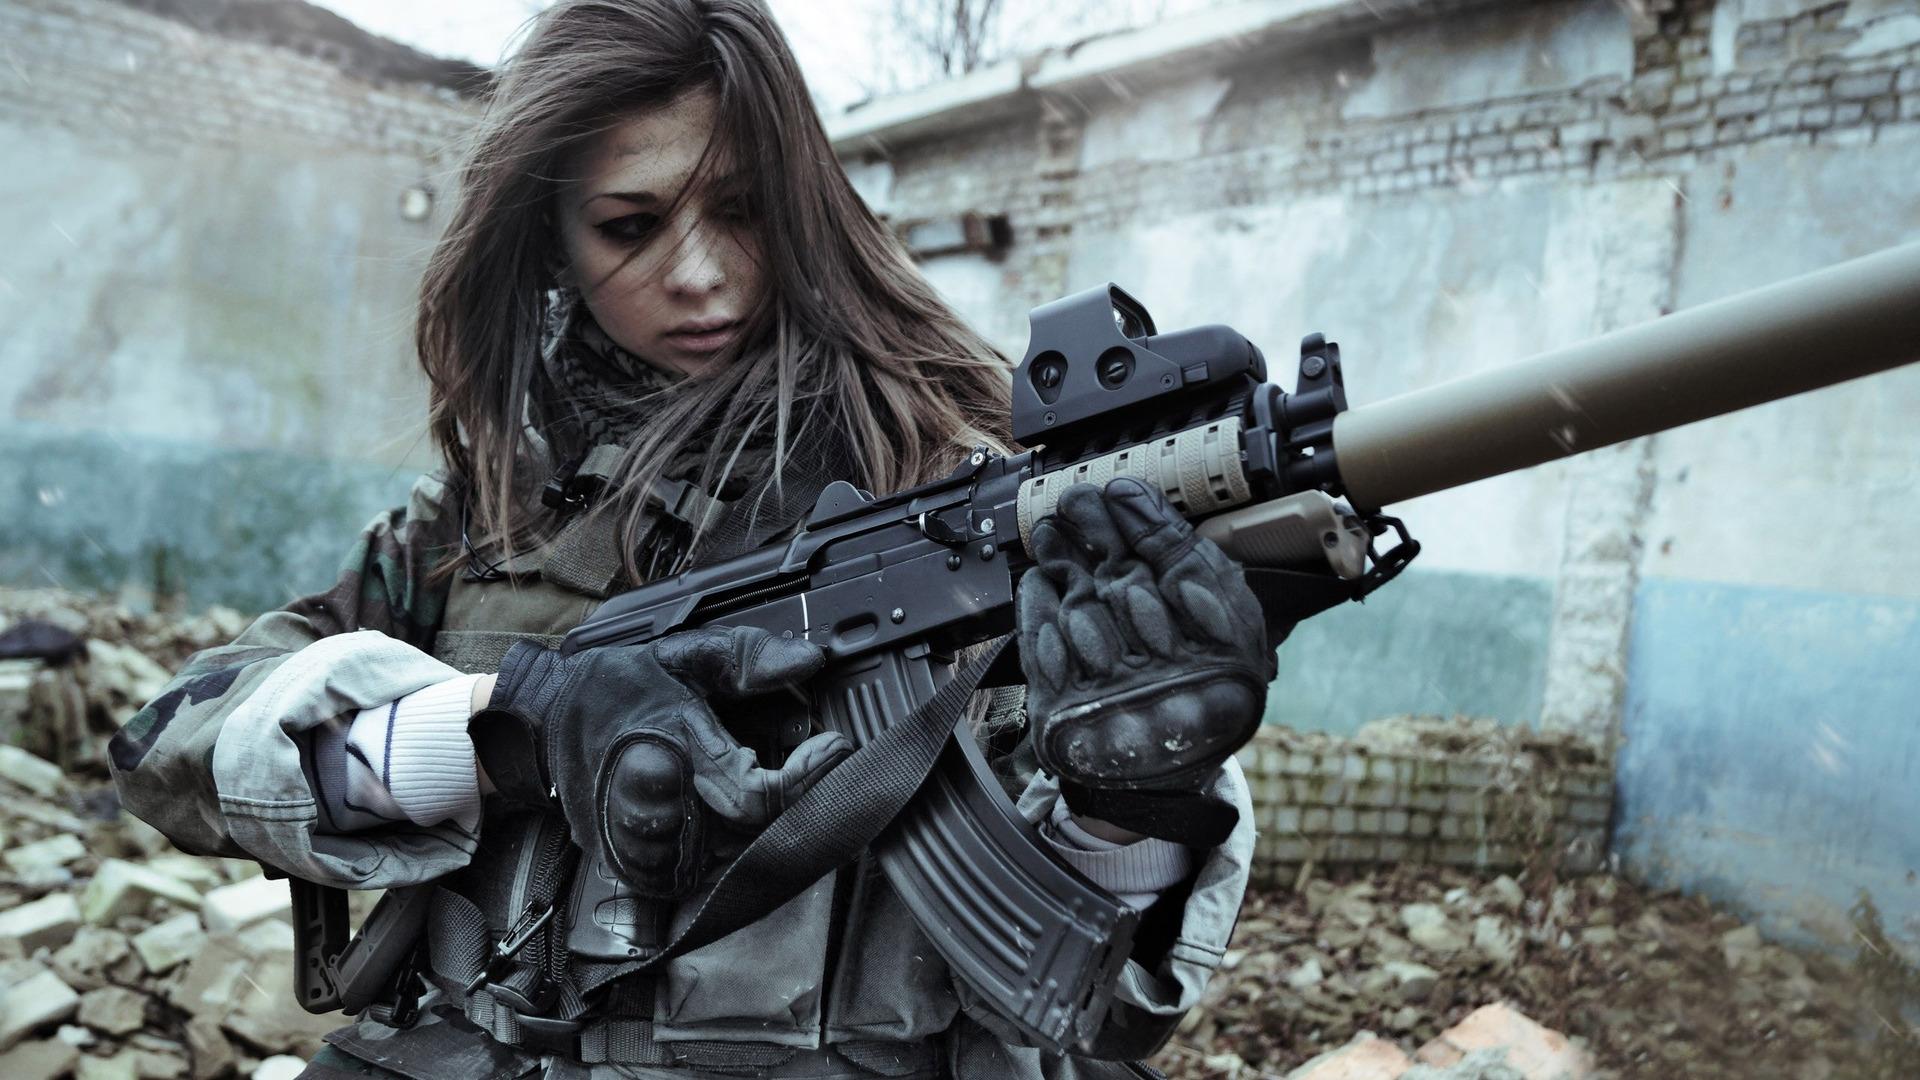 Guns Woman Soldier Sniper Woman Soldier View All Soldiers Wallpaper